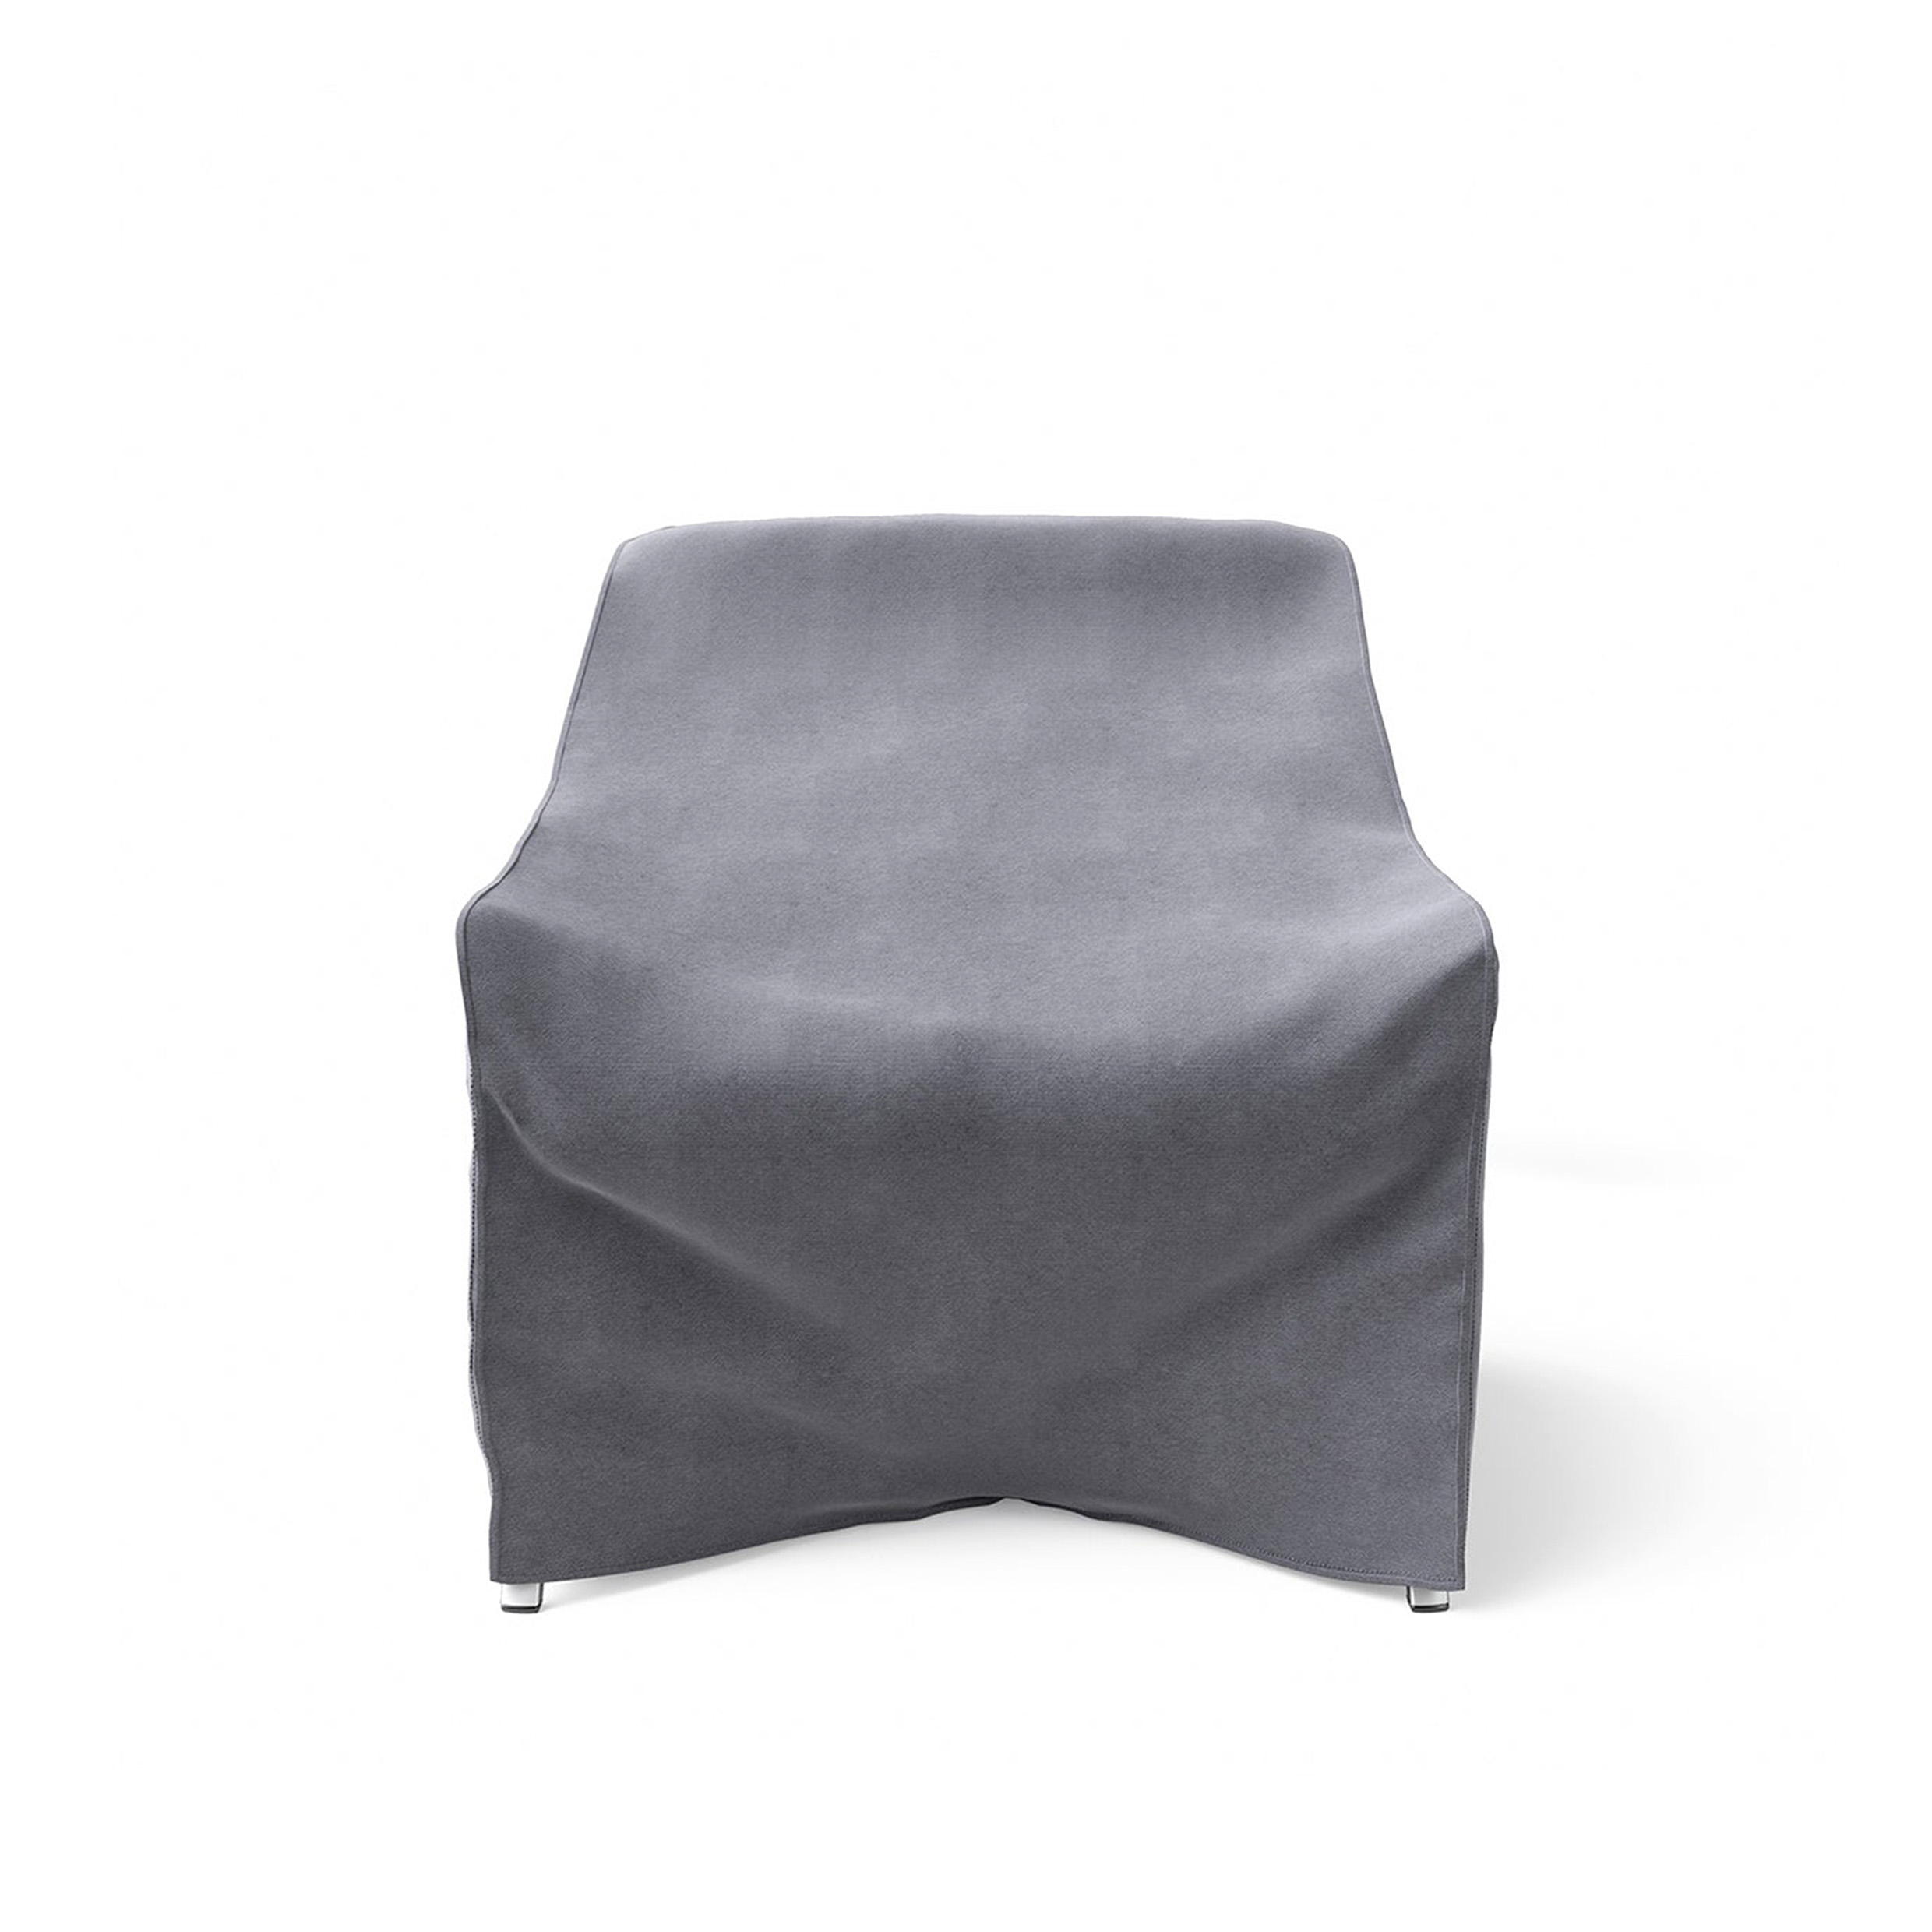 VIPP713 // OPEN-AIR LOUNGE CHAIR | COVER